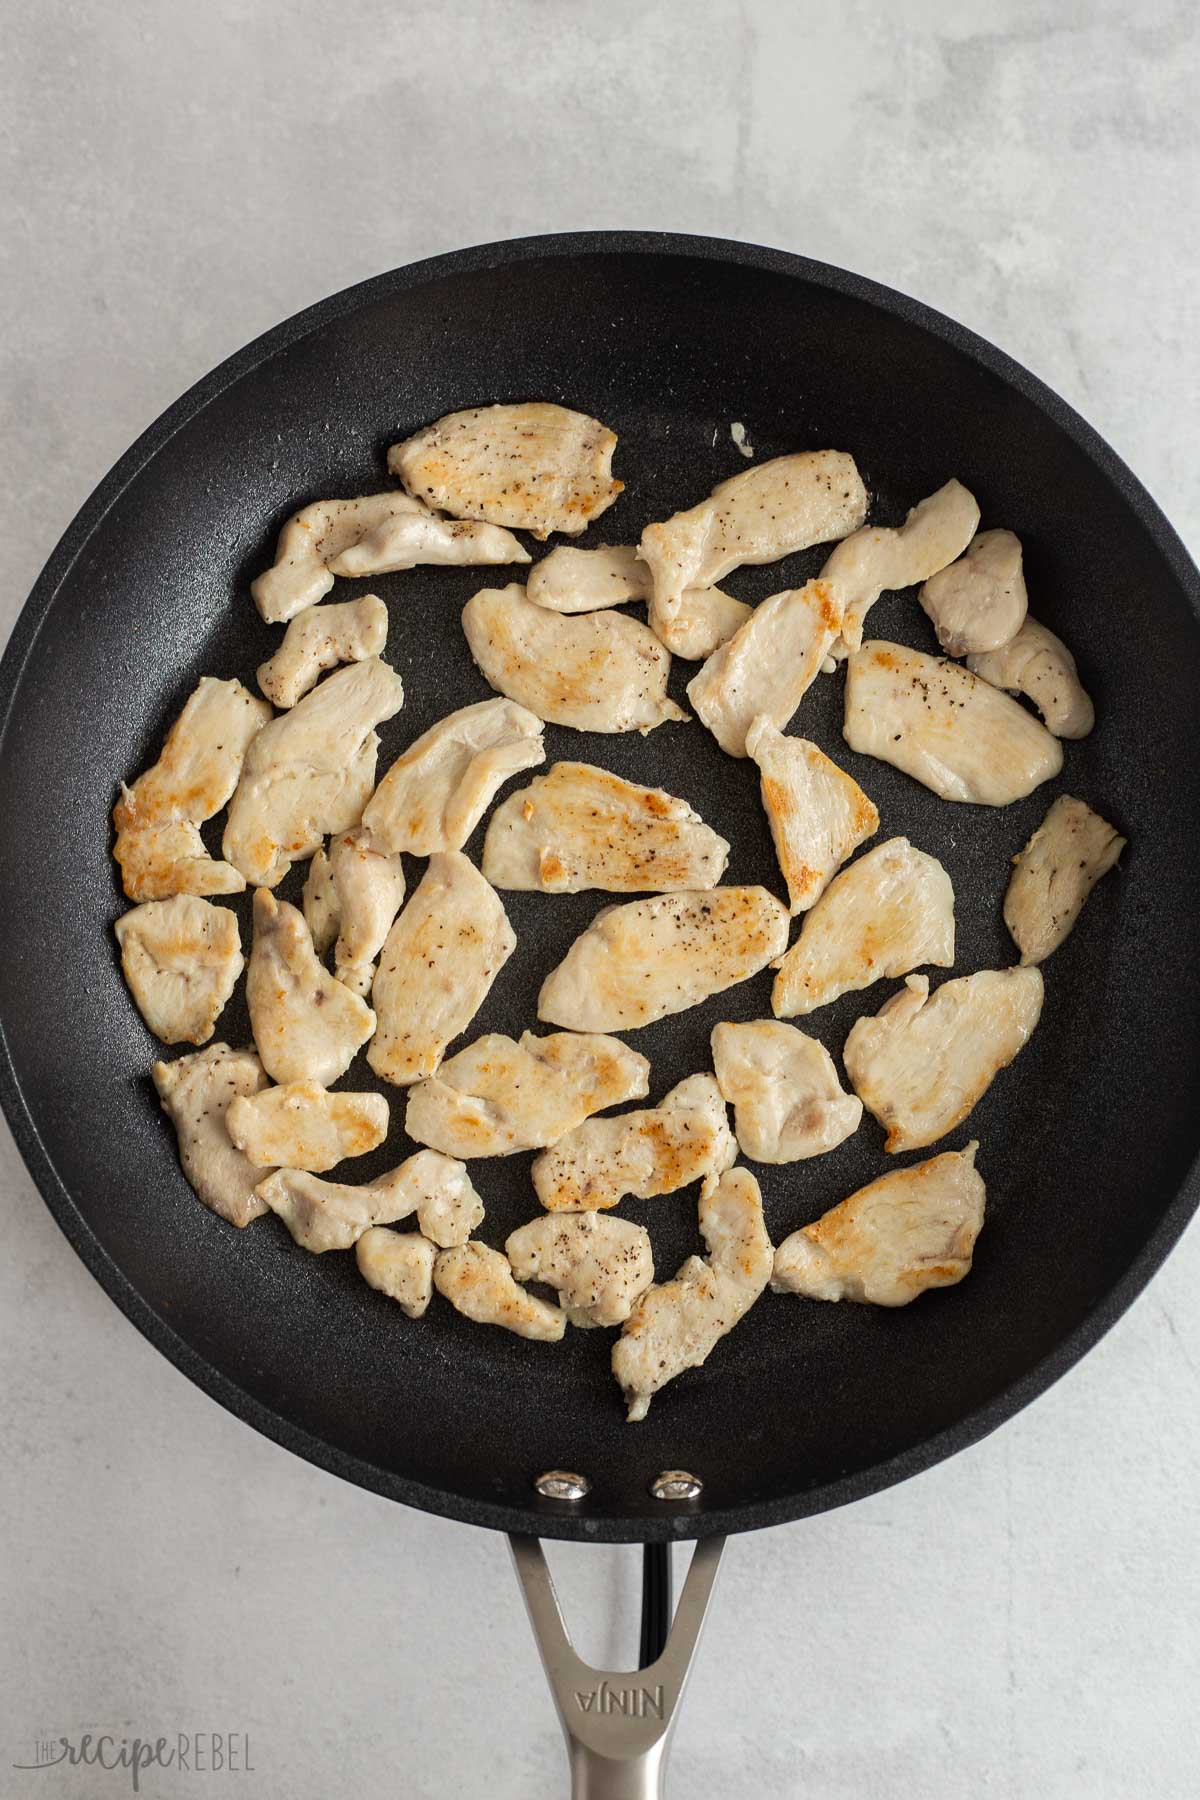 strips of chicken breast being browned in a skillet